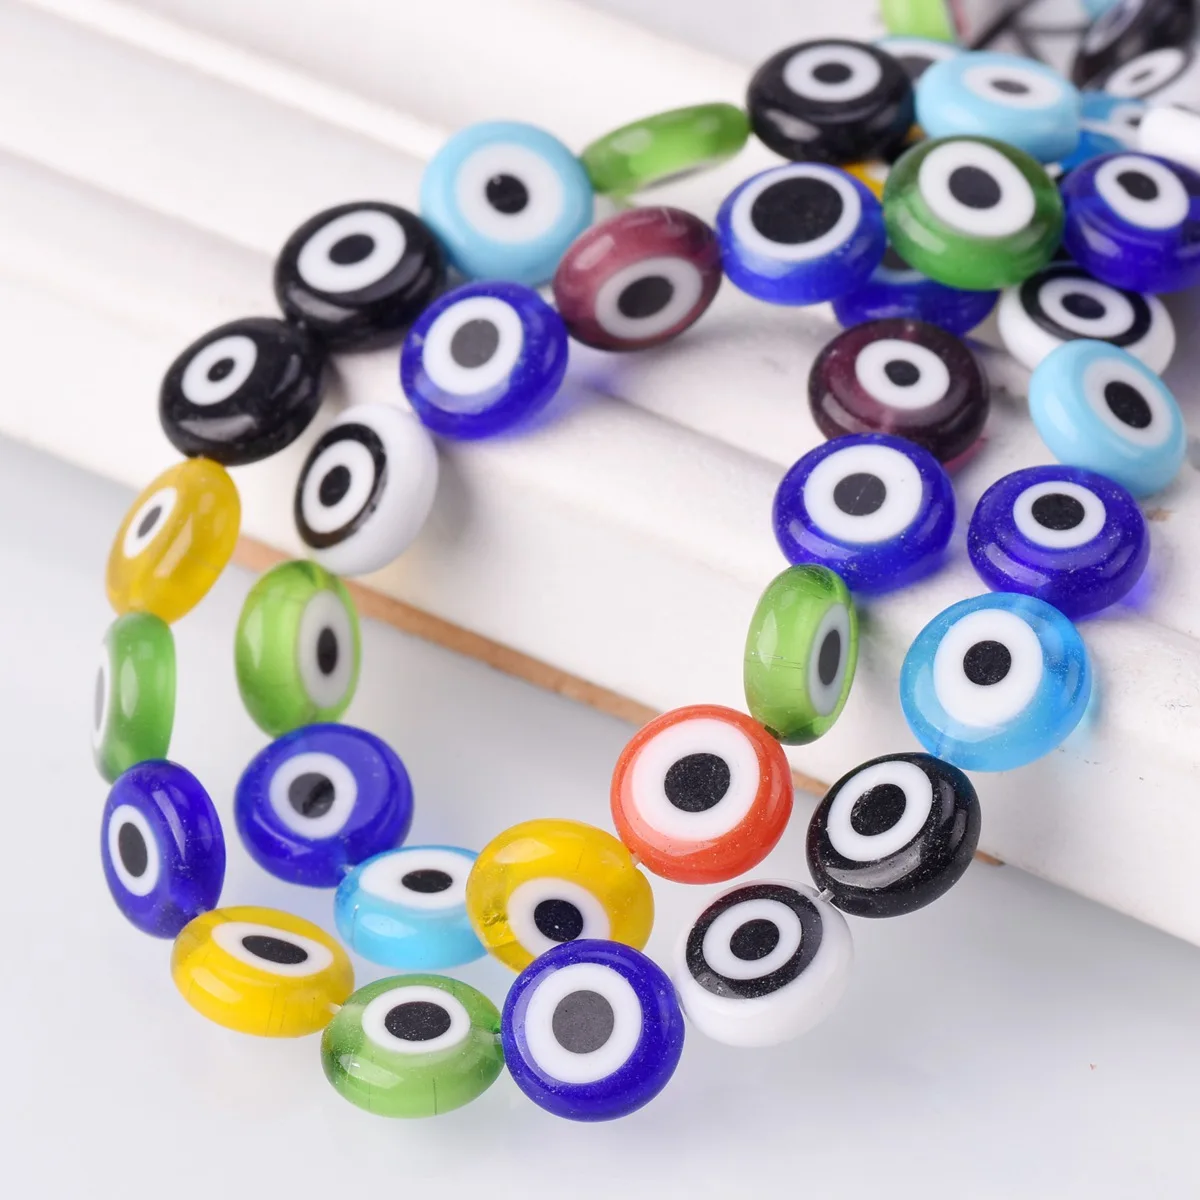 6mm 8mm 10mm 12mm Mixed Flat Round Evil Eye Millefiori Lampwork Glass Beads For Jewelry Making DIY Crafts Findings 10pcs random mixed flower patterns 16mm 25mm flat heart shape millefiori lampwork glass loose beads for jewelry making diy